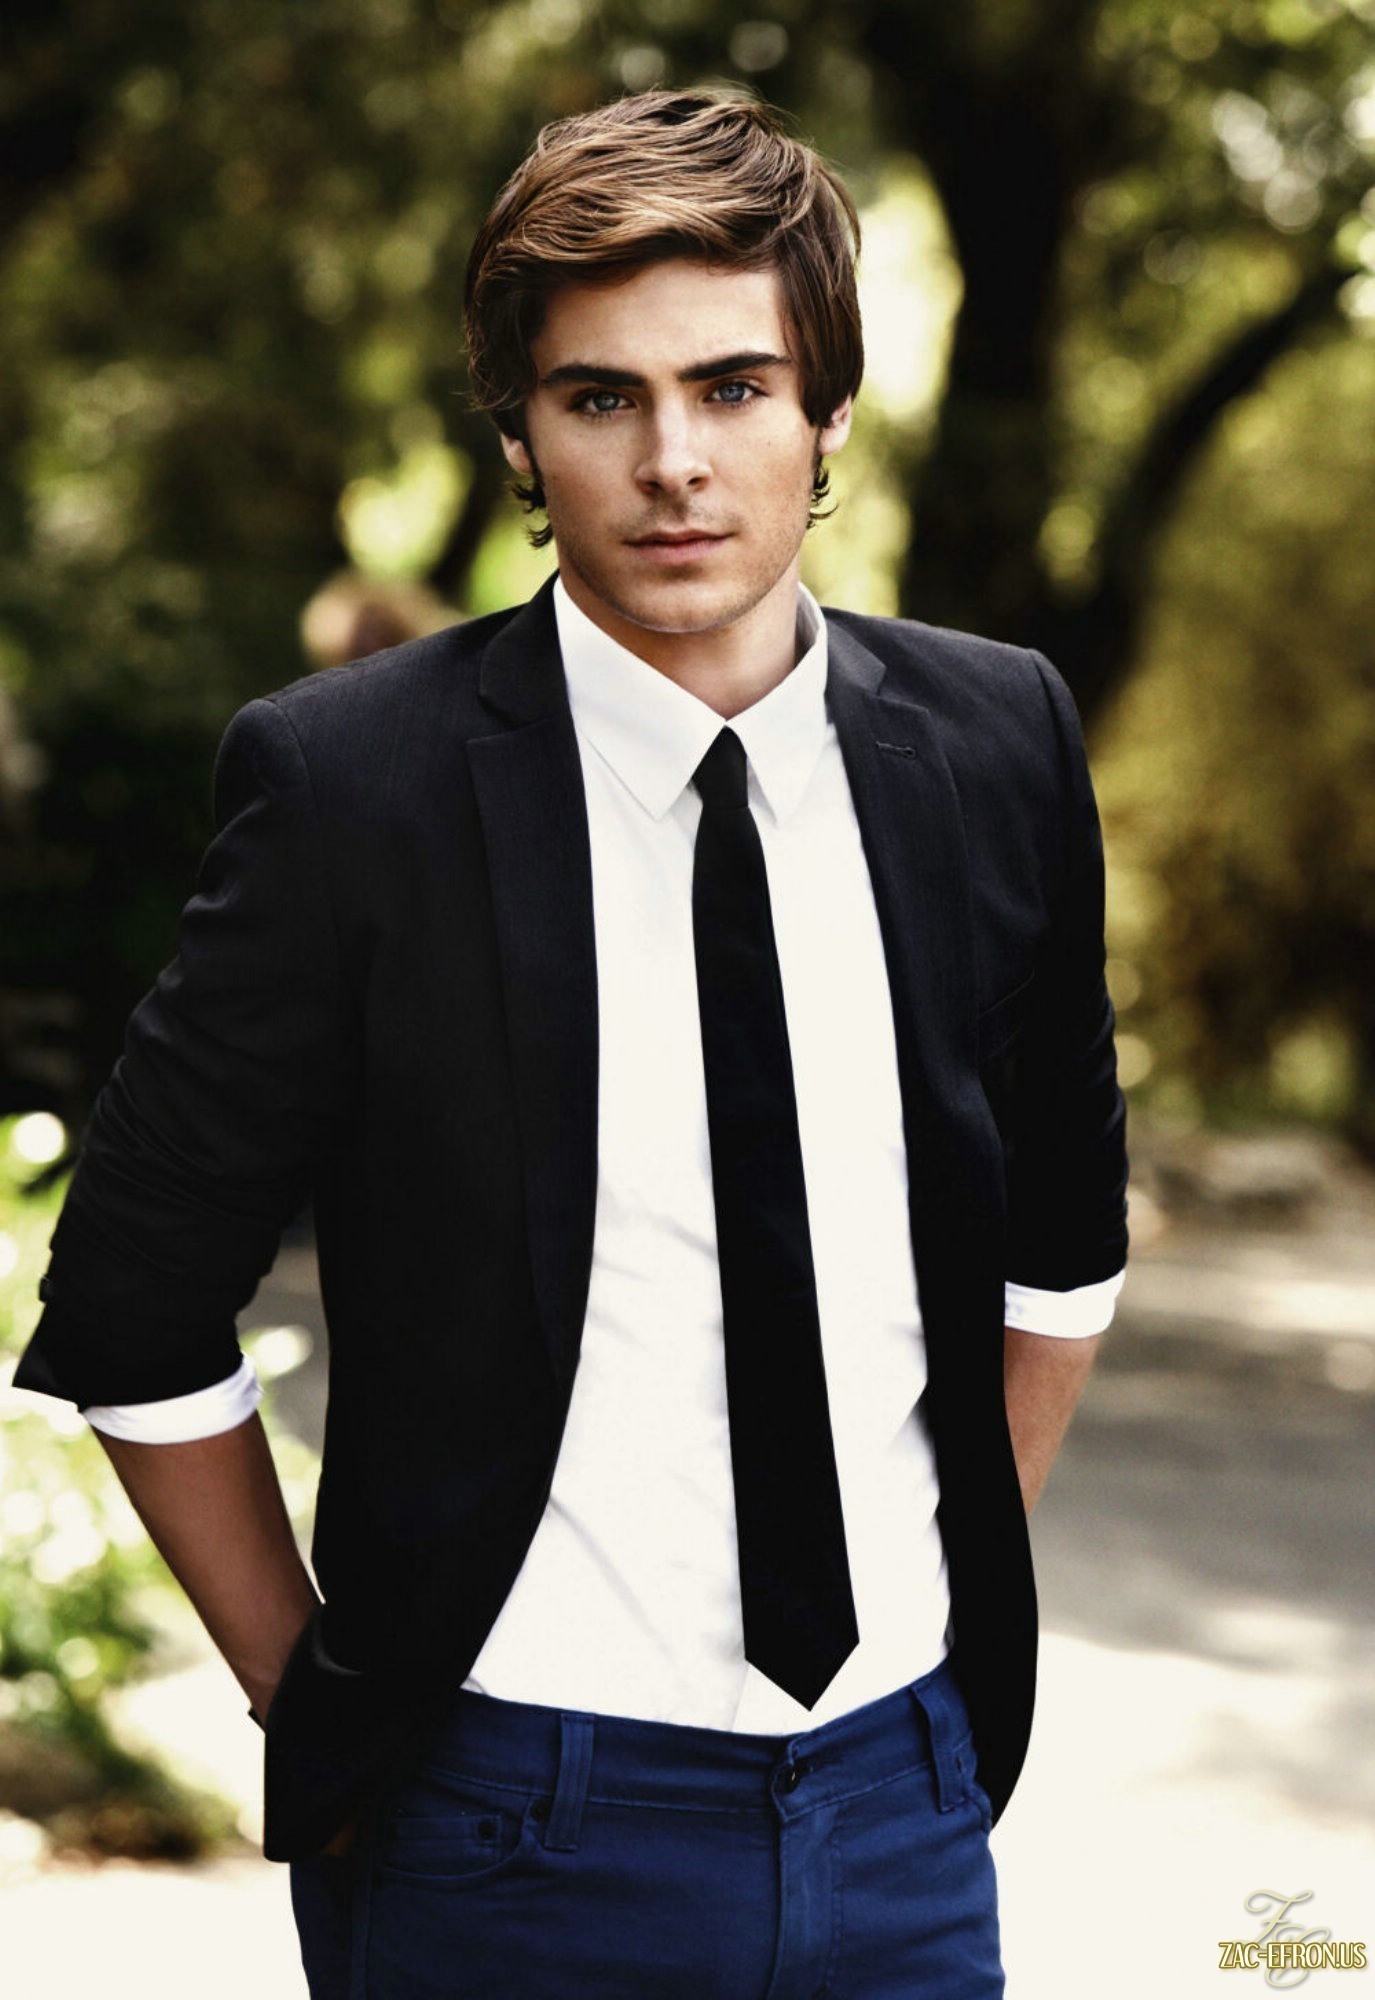 Popular Zac Efron images for mobile phone